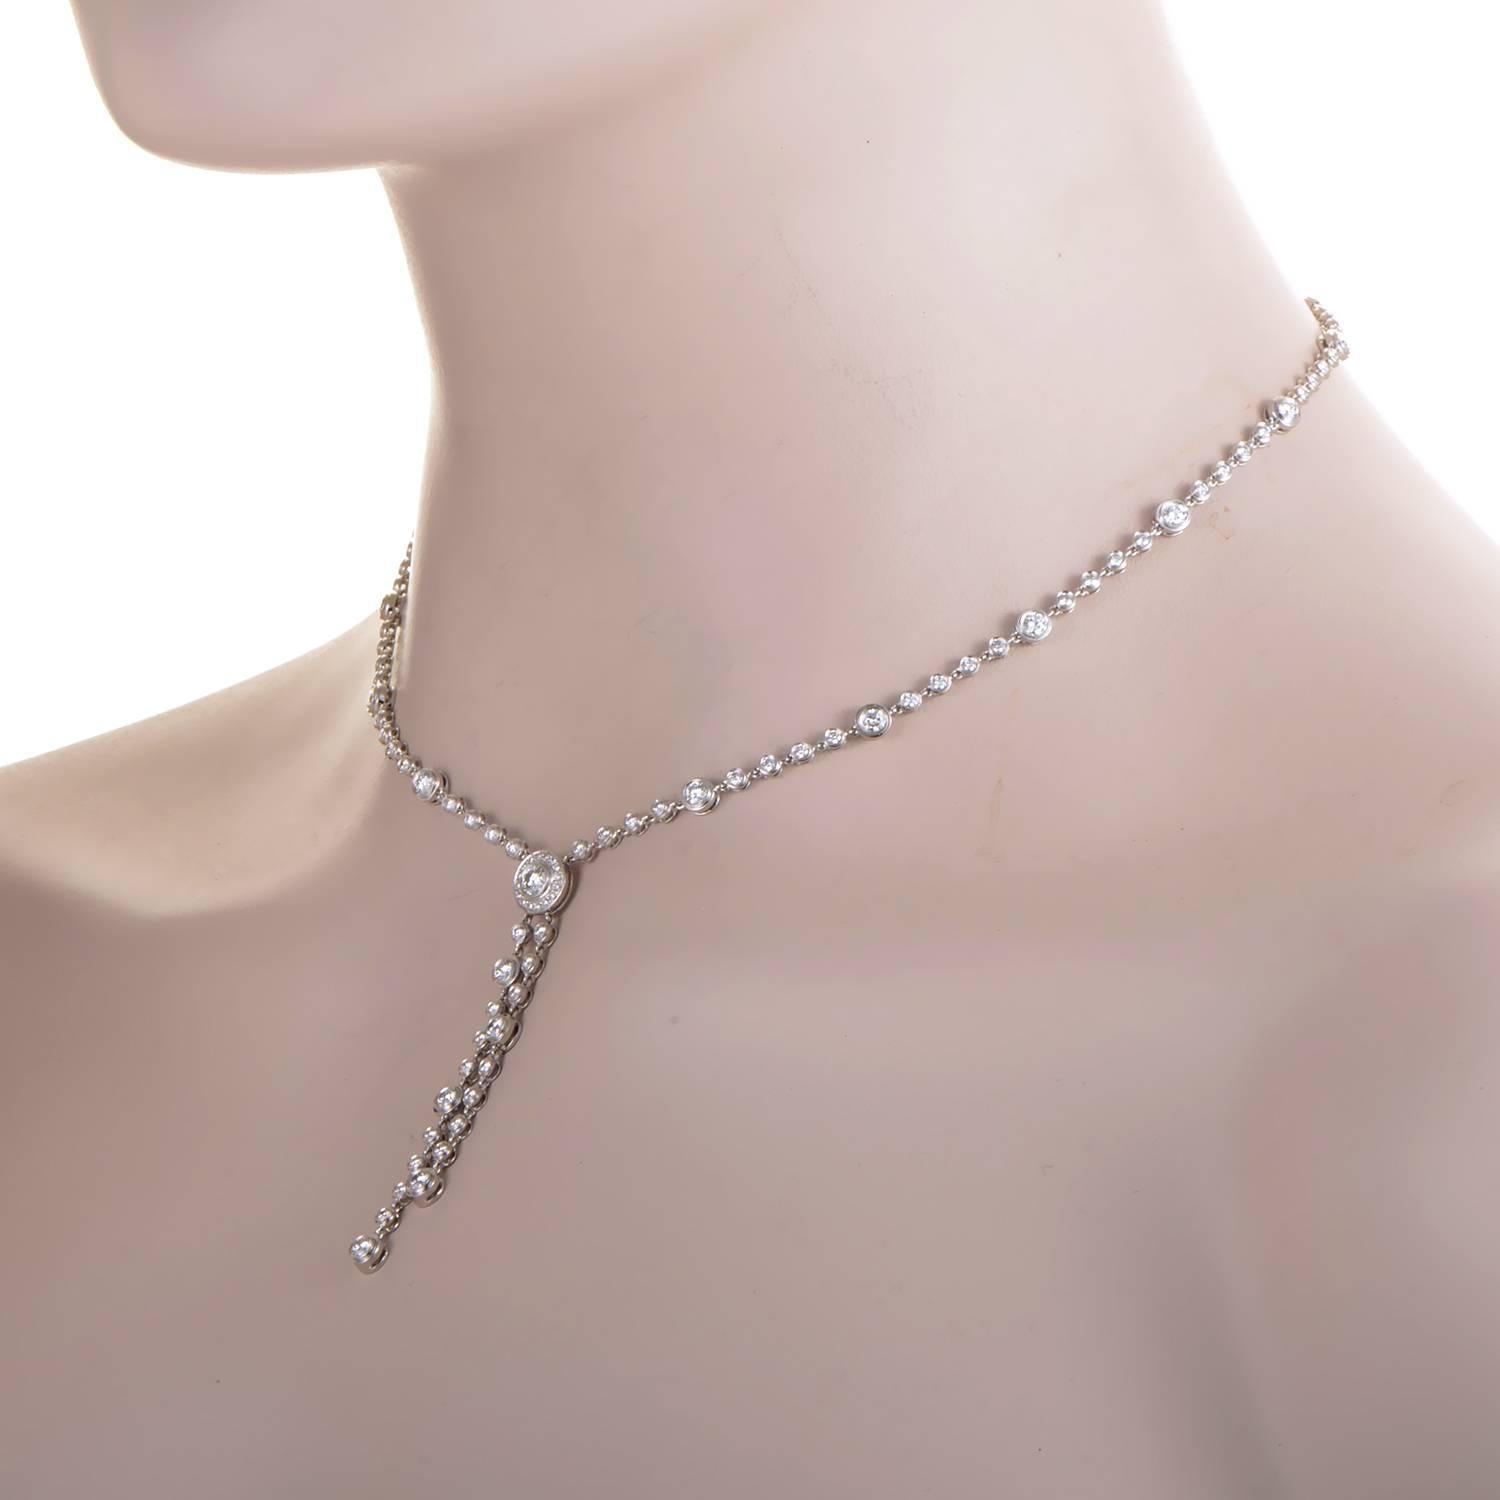 A dazzling cascade of precious diamonds is the hallmark of this Tiffany & Co. design. The necklace is made of platinum and boasts 3.92 ct of white diamonds throughout its exceptional design.
Included Items: Manufacturer's Box
Approximate